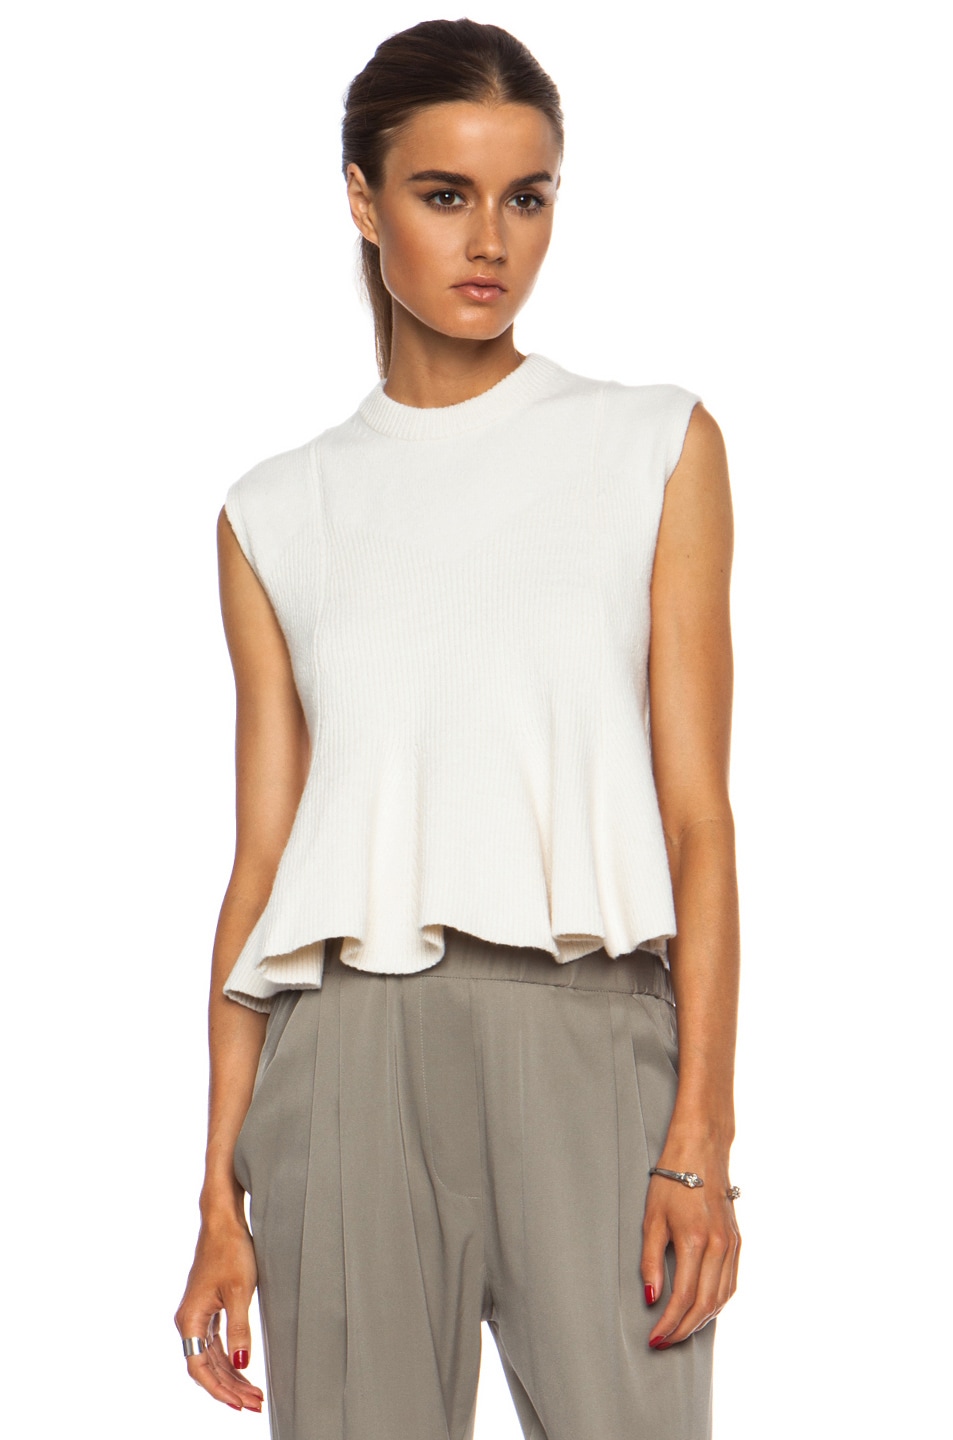 3.1 phillip lim Cashmere Blend Flare Top in Ivory | FWRD